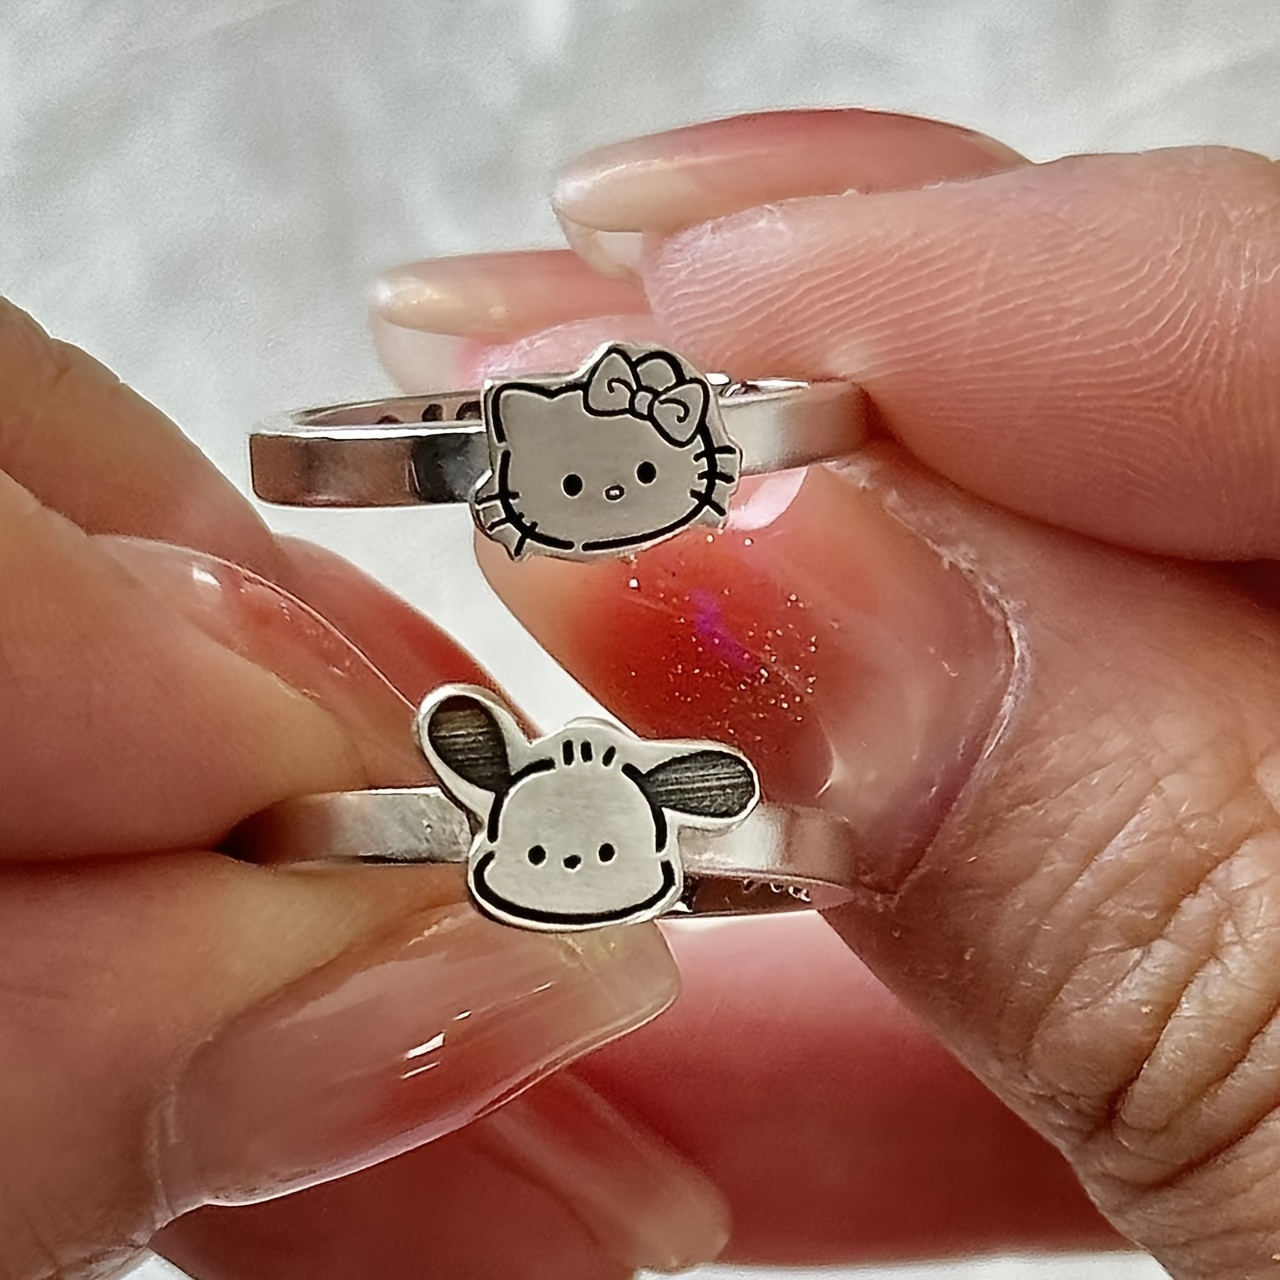 

Authorized Ring Hello Kitty Open Ring Cartoon Graffiti Exquisite Fashion Temperament Pacha Dog Couple Models Ring Ring Christmas Halloween New Year's Gift Valentine's Day Gift Birthday Gift